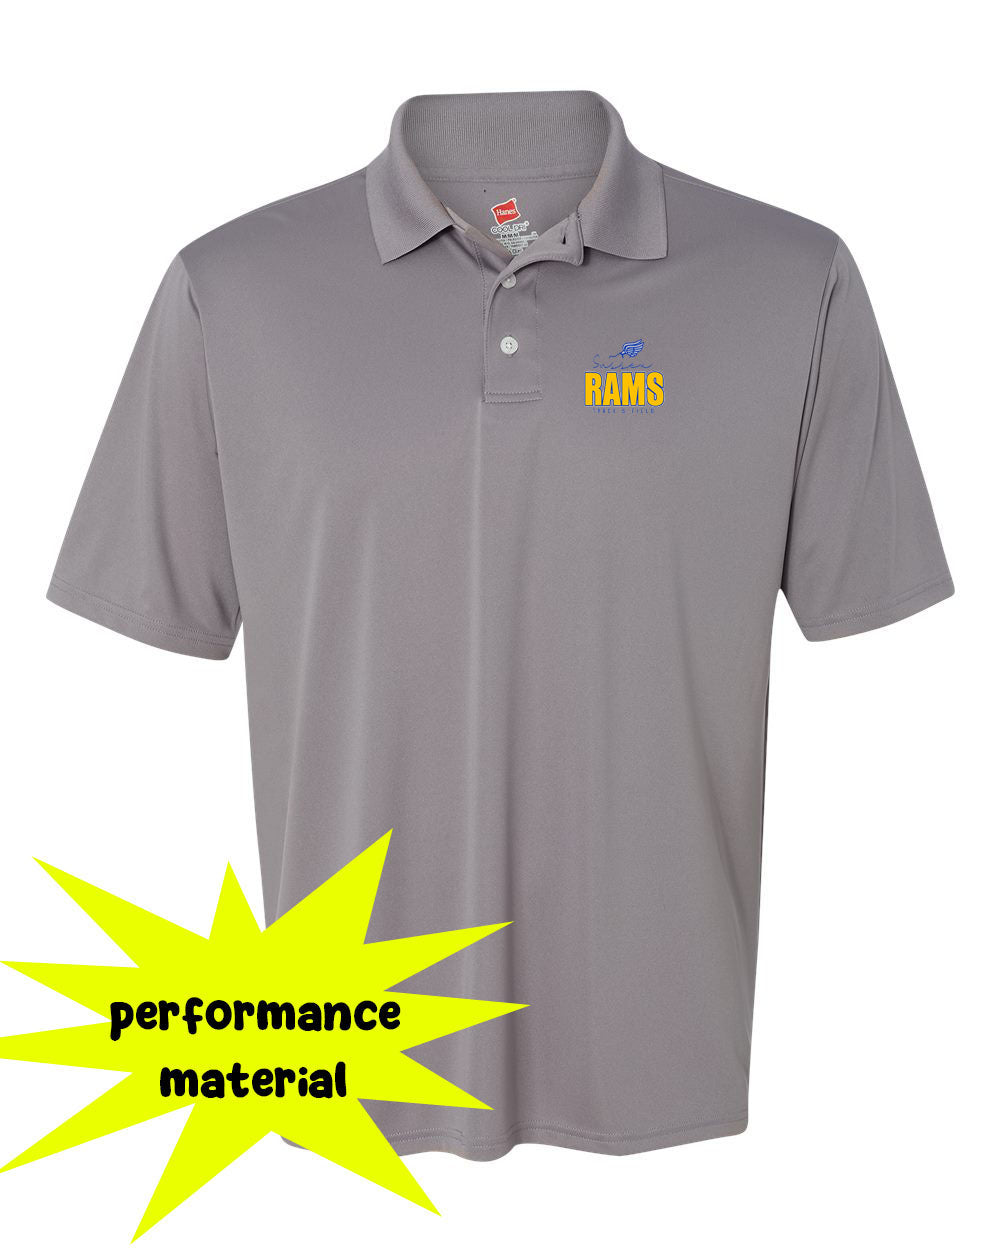 Sussex Rams Track Performance Material Polo T-Shirt Design 4